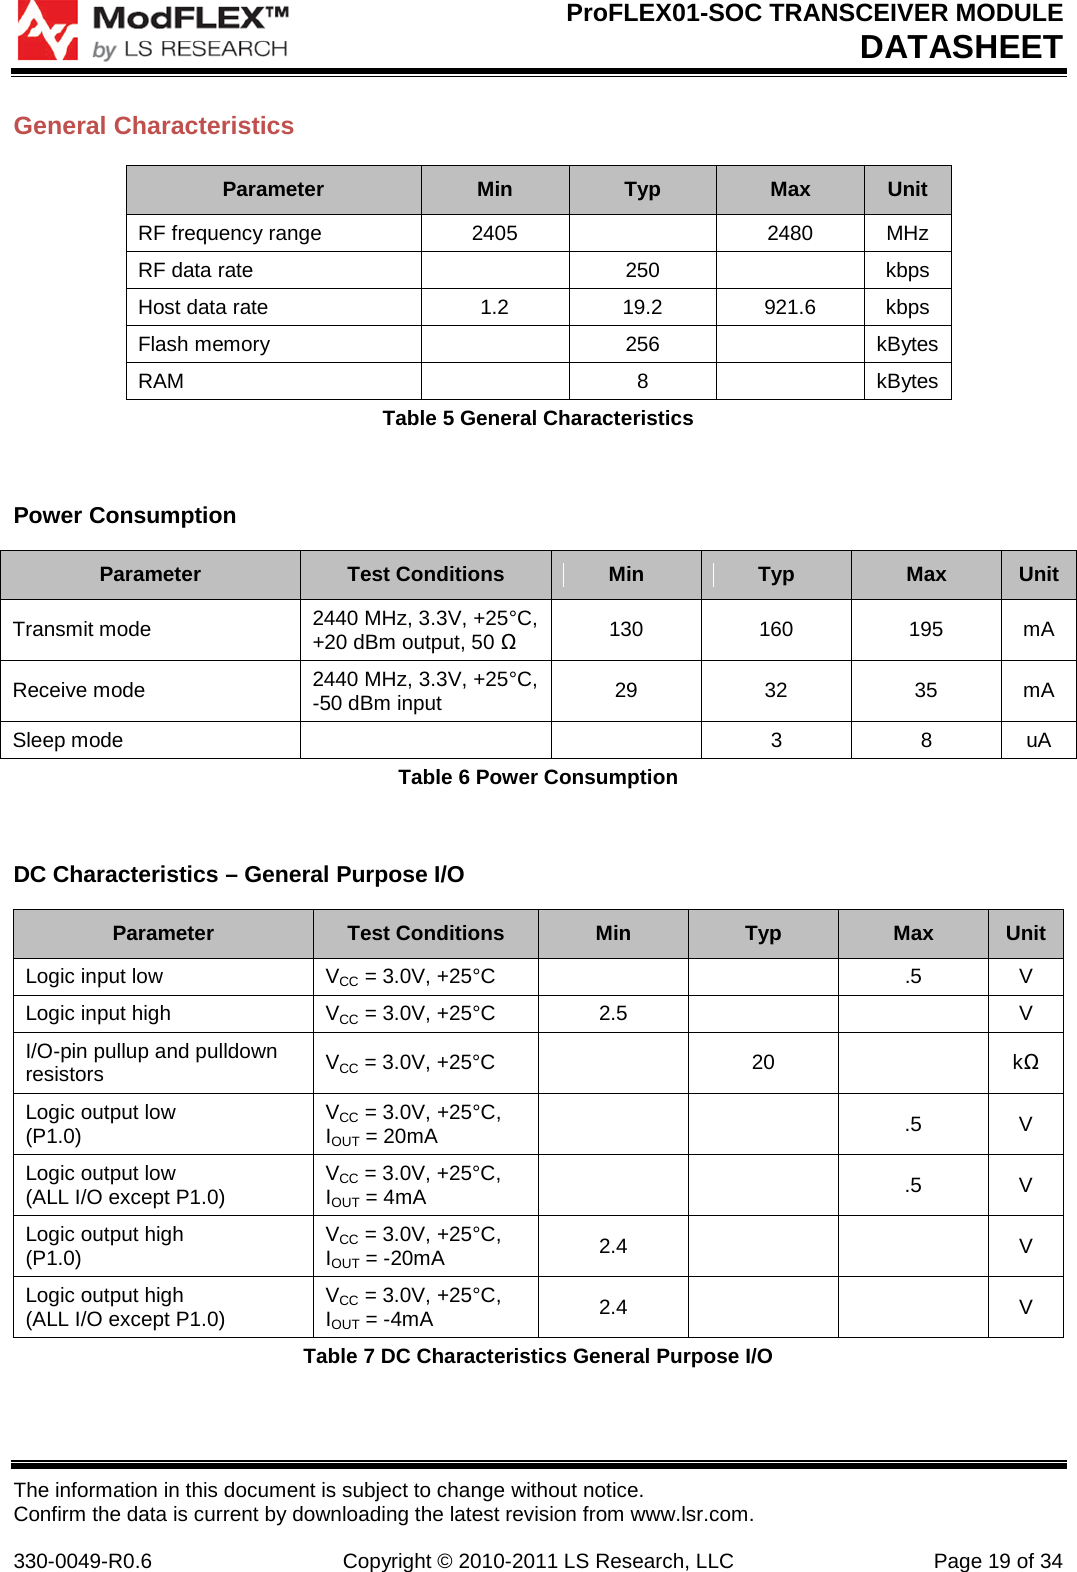 ProFLEX01-SOC TRANSCEIVER MODULE DATASHEET The information in this document is subject to change without notice. Confirm the data is current by downloading the latest revision from www.lsr.com.  330-0049-R0.6 Copyright © 2010-2011 LS Research, LLC Page 19 of 34 General Characteristics Parameter Min Typ Max Unit RF frequency range 2405  2480 MHz RF data rate  250  kbps Host data rate 1.2 19.2 921.6 kbps Flash memory  256  kBytes RAM  8  kBytes Table 5 General Characteristics  Power Consumption Parameter Test Conditions Min Typ Max Unit Transmit mode 2440 MHz, 3.3V, +25°C, +20 dBm output, 50 Ω 130  160  195 mA Receive mode 2440 MHz, 3.3V, +25°C, -50 dBm input 29  32  35  mA Sleep mode   3 8 uA Table 6 Power Consumption  DC Characteristics – General Purpose I/O Parameter Test Conditions Min Typ Max Unit Logic input low VCC = 3.0V, +25°C   .5 V Logic input high VCC = 3.0V, +25°C 2.5   V I/O-pin pullup and pulldown resistors VCC = 3.0V, +25°C    20    kΩ Logic output low (P1.0) VCC = 3.0V, +25°C, IOUT = 20mA     .5  V Logic output low (ALL I/O except P1.0) VCC = 3.0V, +25°C, IOUT = 4mA     .5  V Logic output high (P1.0) VCC = 3.0V, +25°C, IOUT = -20mA 2.4      V Logic output high (ALL I/O except P1.0) VCC = 3.0V, +25°C, IOUT = -4mA 2.4      V Table 7 DC Characteristics General Purpose I/O 